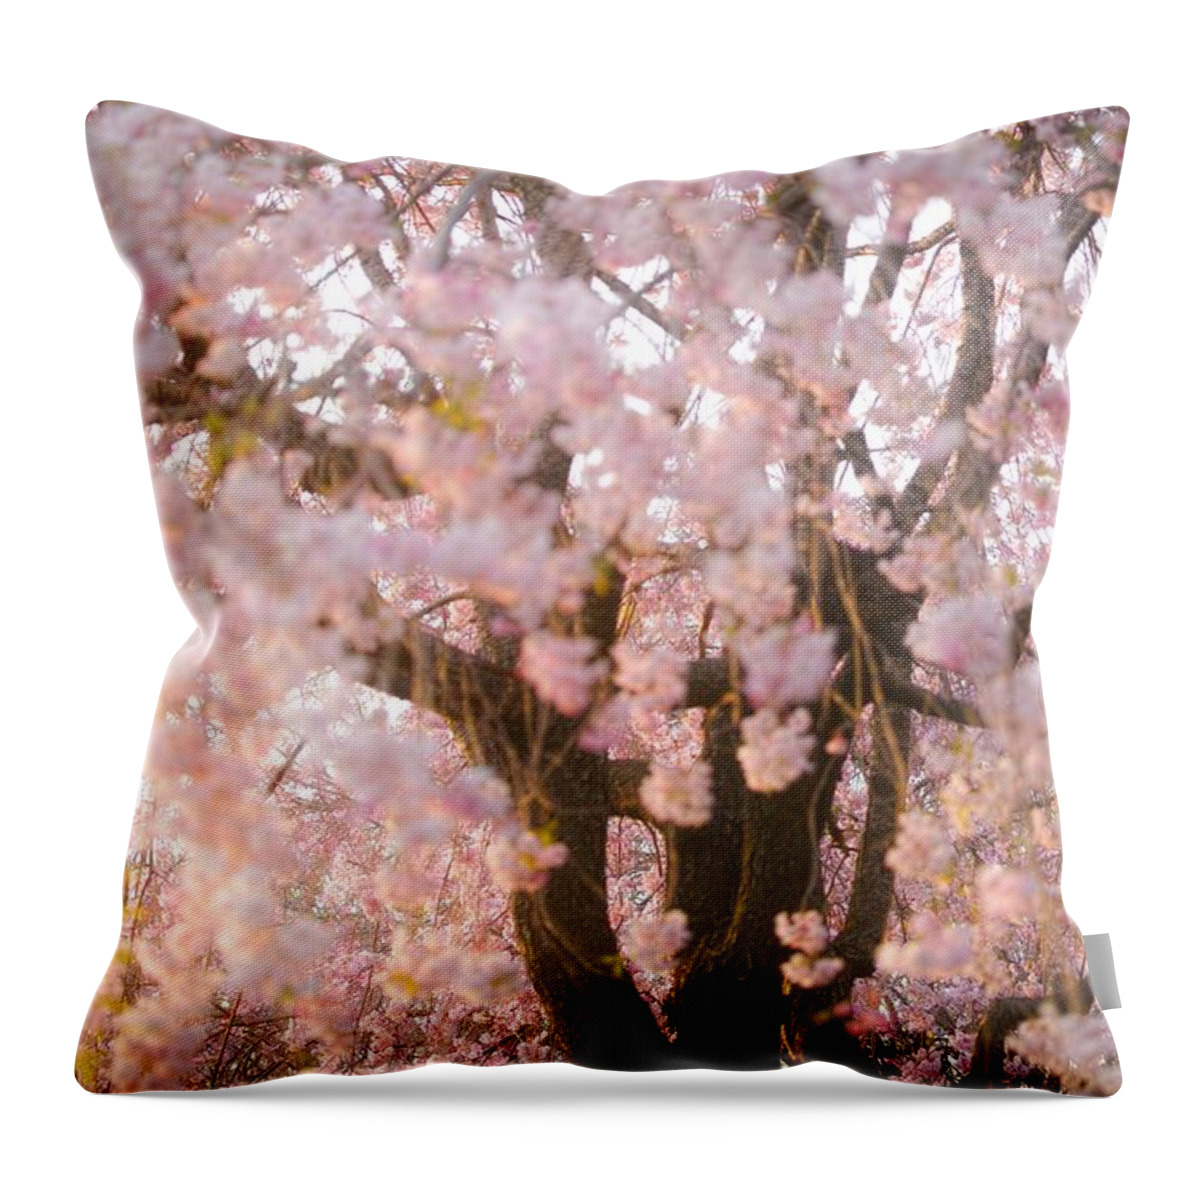 Cherryblossoms Throw Pillow featuring the photograph Cherry blossoms#11 by Yasuhiro Fukui